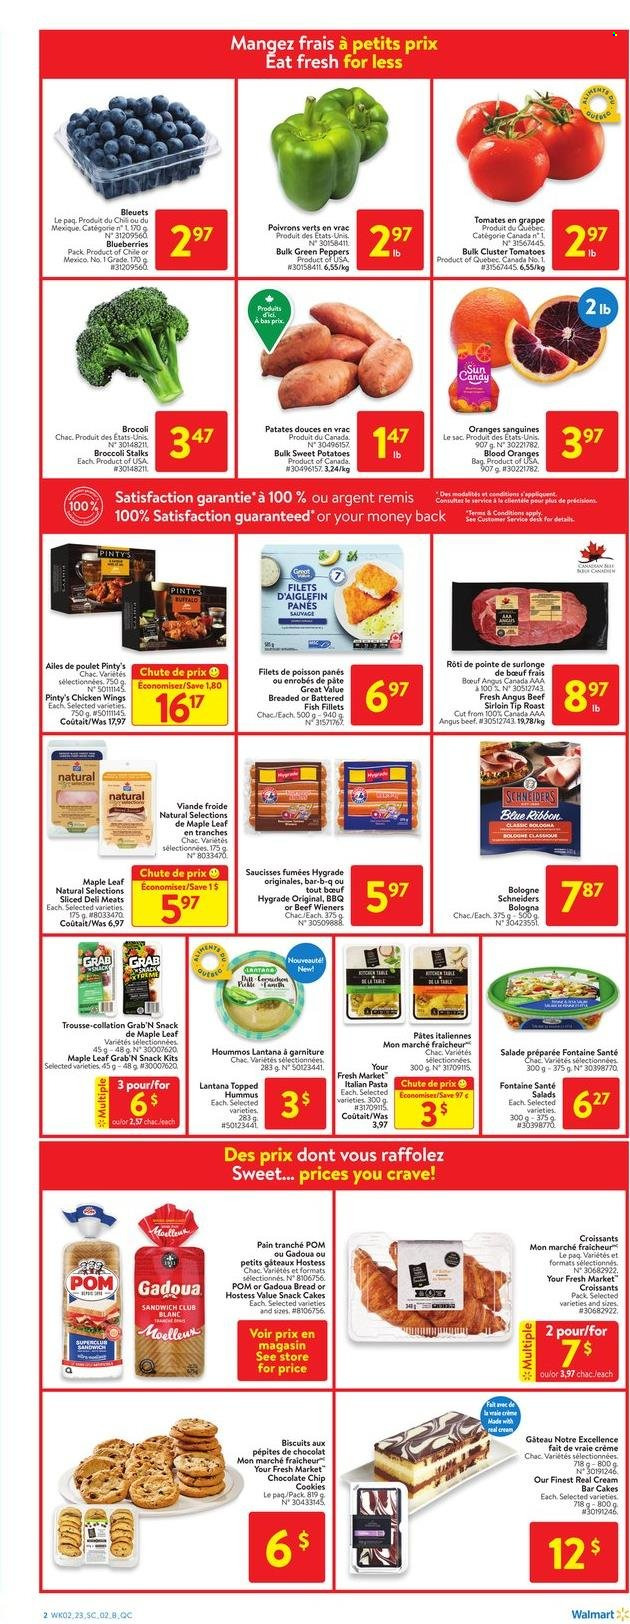 thumbnail - Walmart Flyer - February 02, 2023 - February 08, 2023 - Sales products - bread, cake, croissant, Blue Ribbon, broccoli, sweet potato, potatoes, peppers, blueberries, oranges, fish fillets, fish, sandwich, pasta, bologna sausage, hummus, chicken wings, cookies, snack, biscuit, beef meat, beef sirloin, table, kitchen table. Page 5.